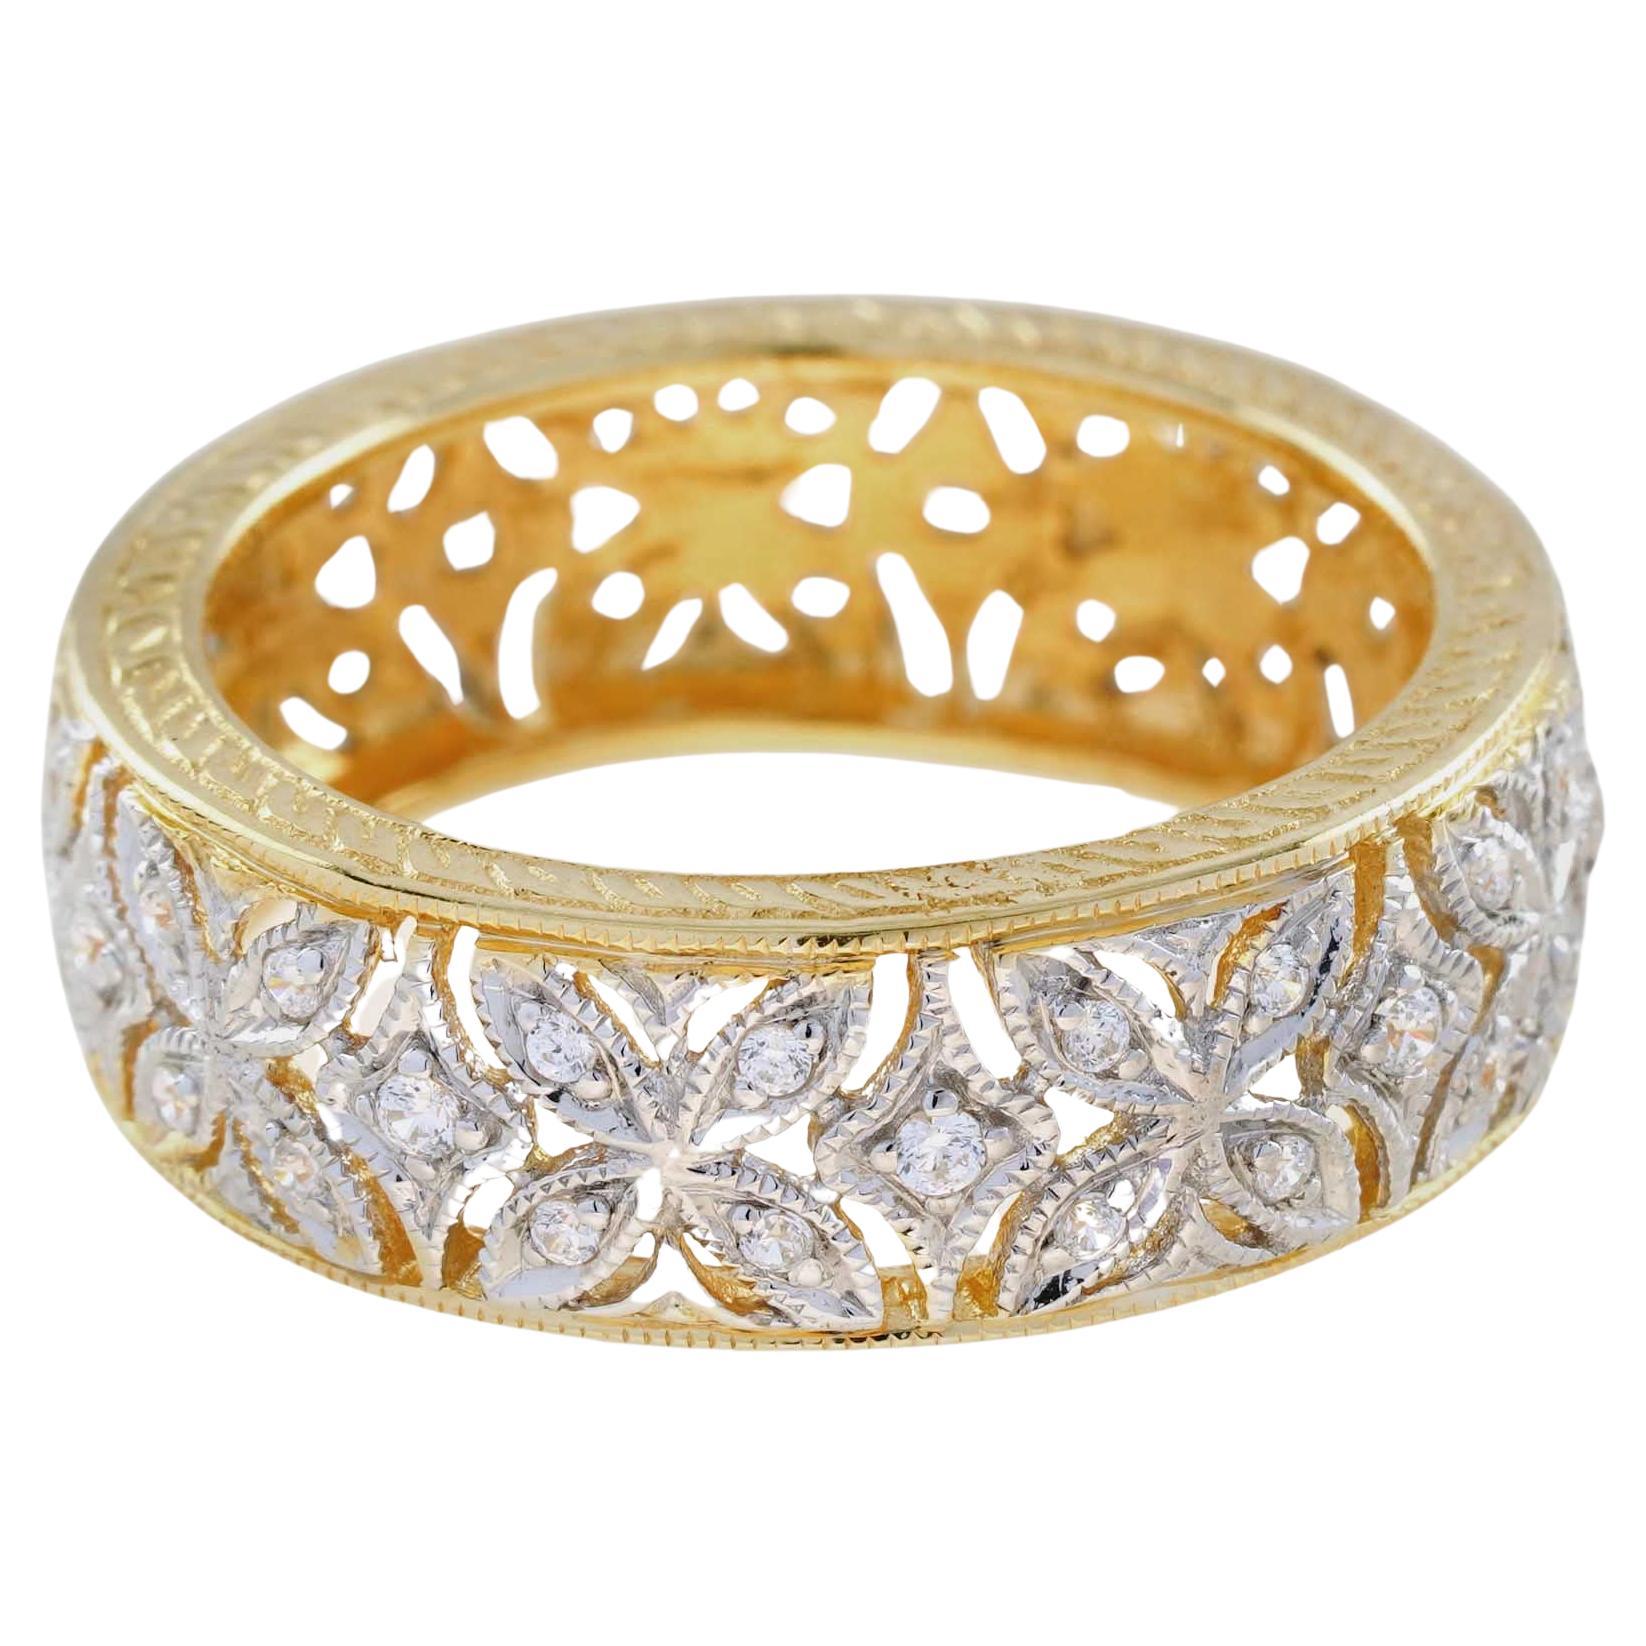 For Sale:  Natural Diamond Vintage Stye Floral Filigree Band Ring in Solid 9K Two Tone Gold